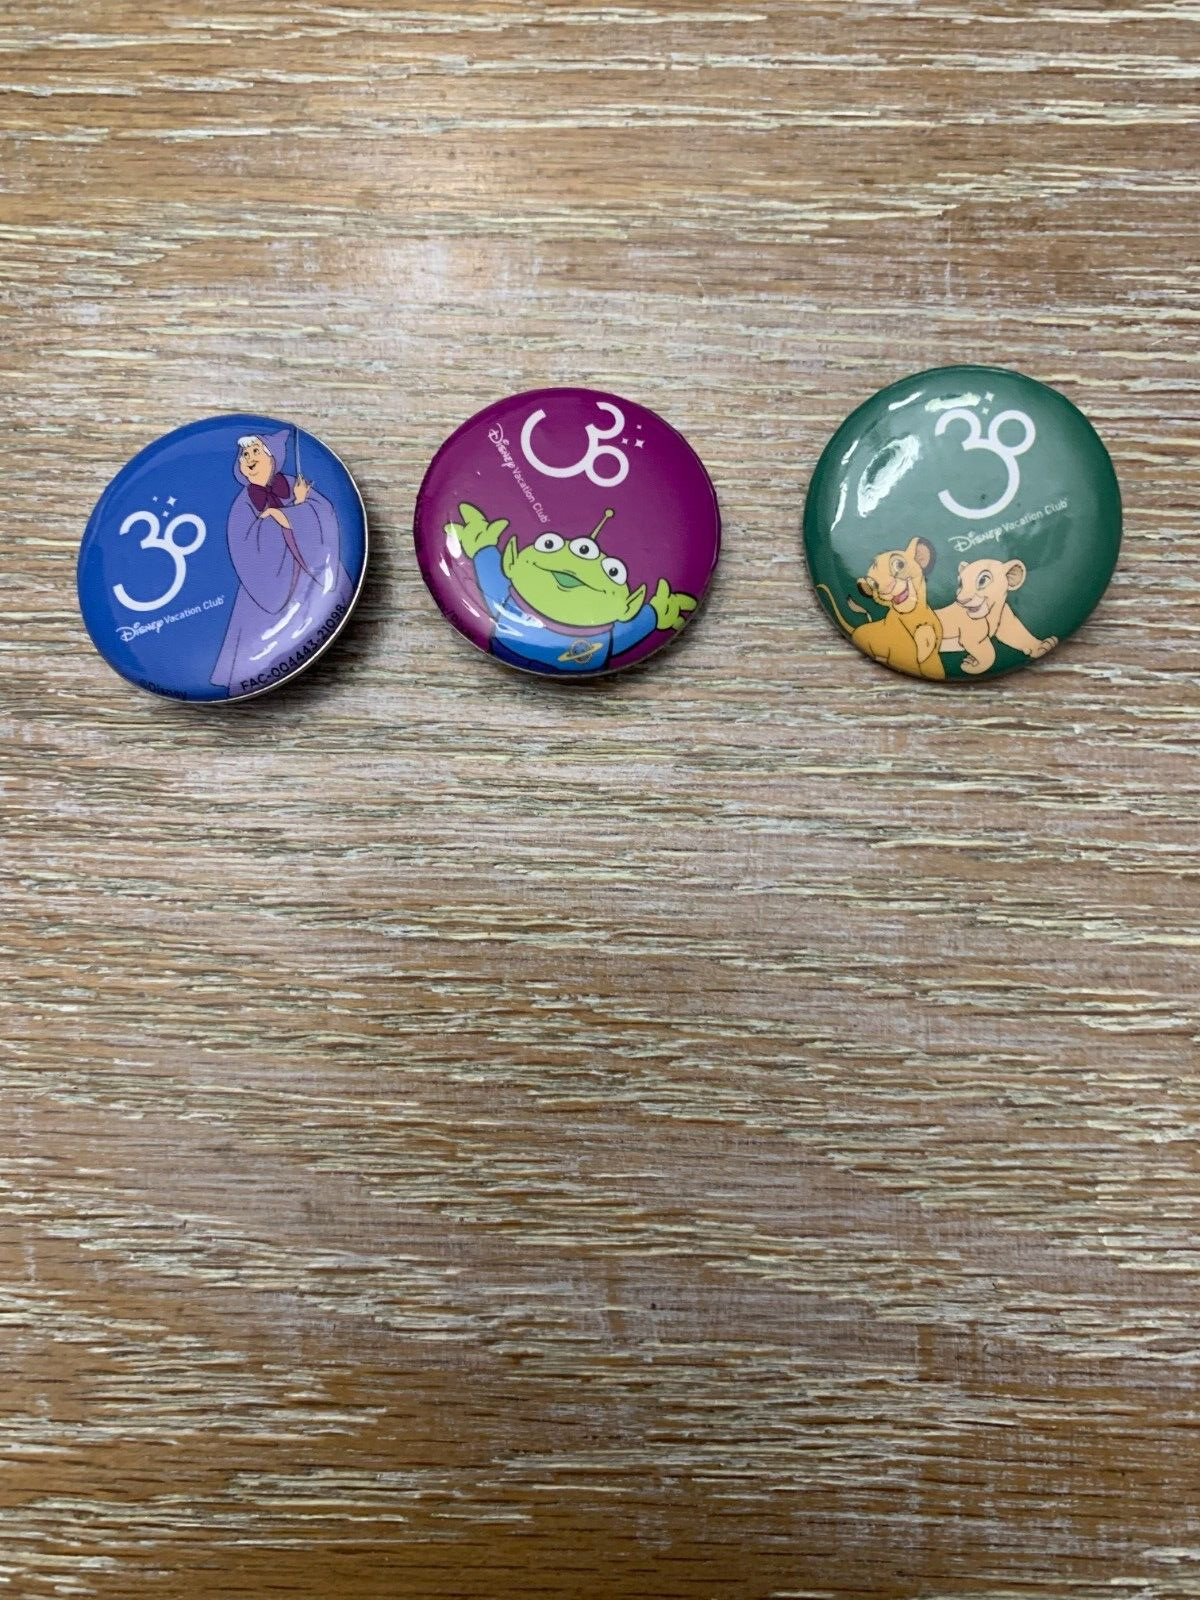 Disney Vacation Club Celebrated Epcot Scavenger Hunt 3 pins